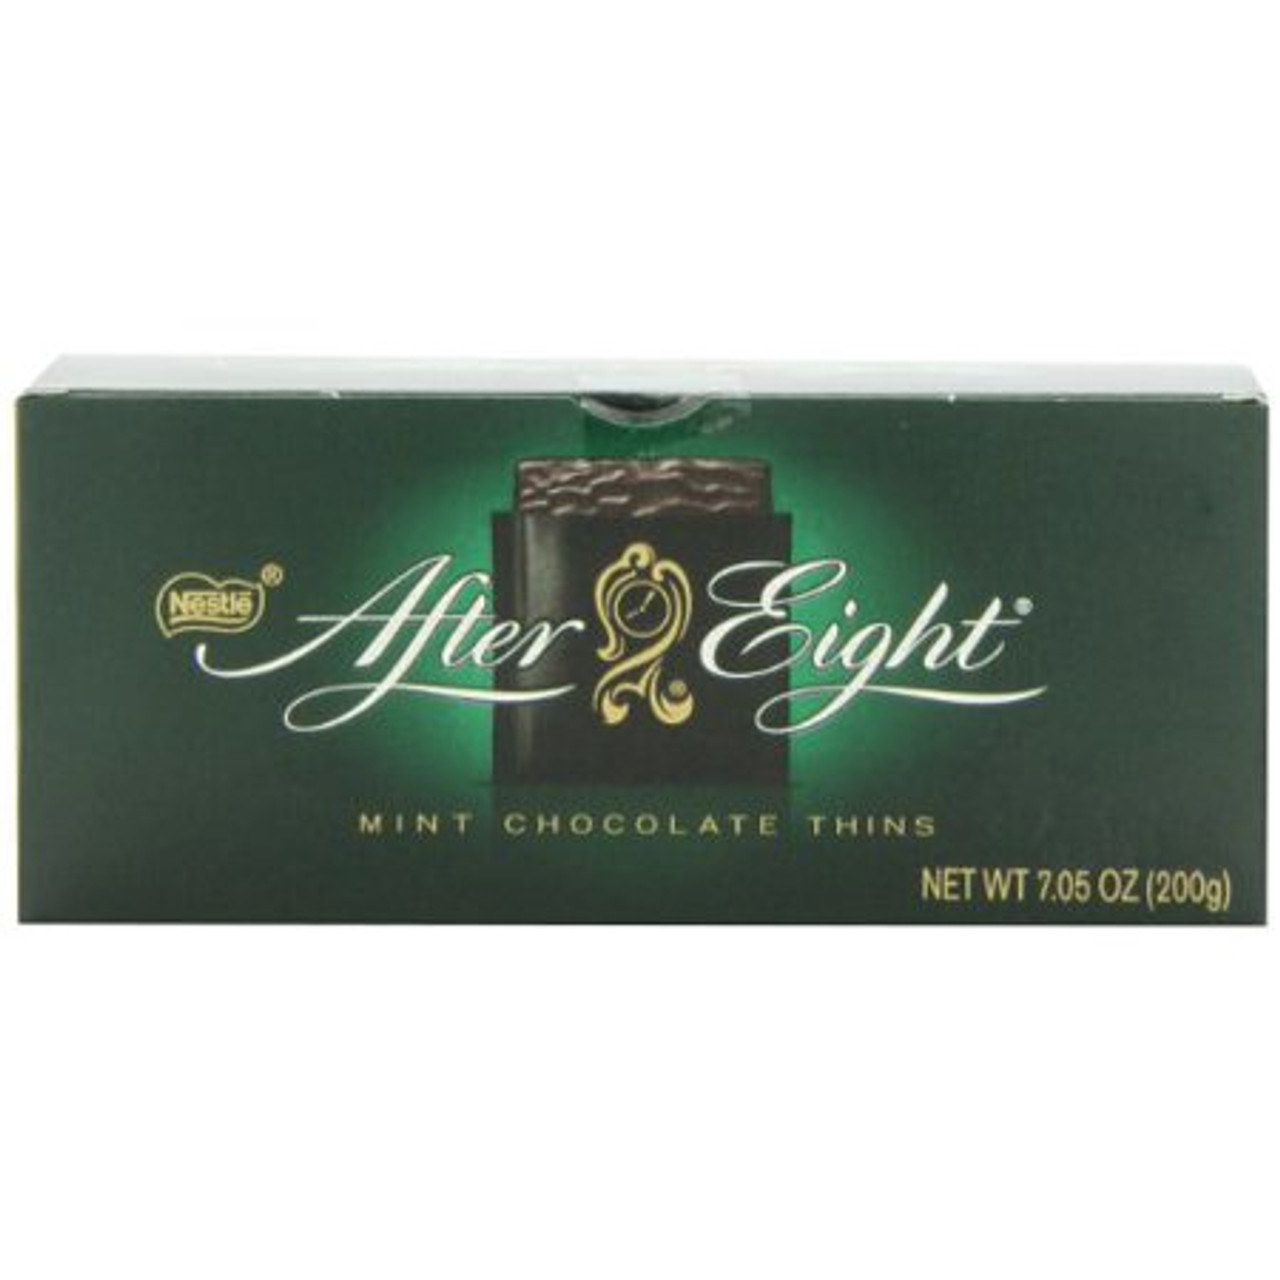 Nestlé After Eight Mint Chocolate Thins, 300 Grams 